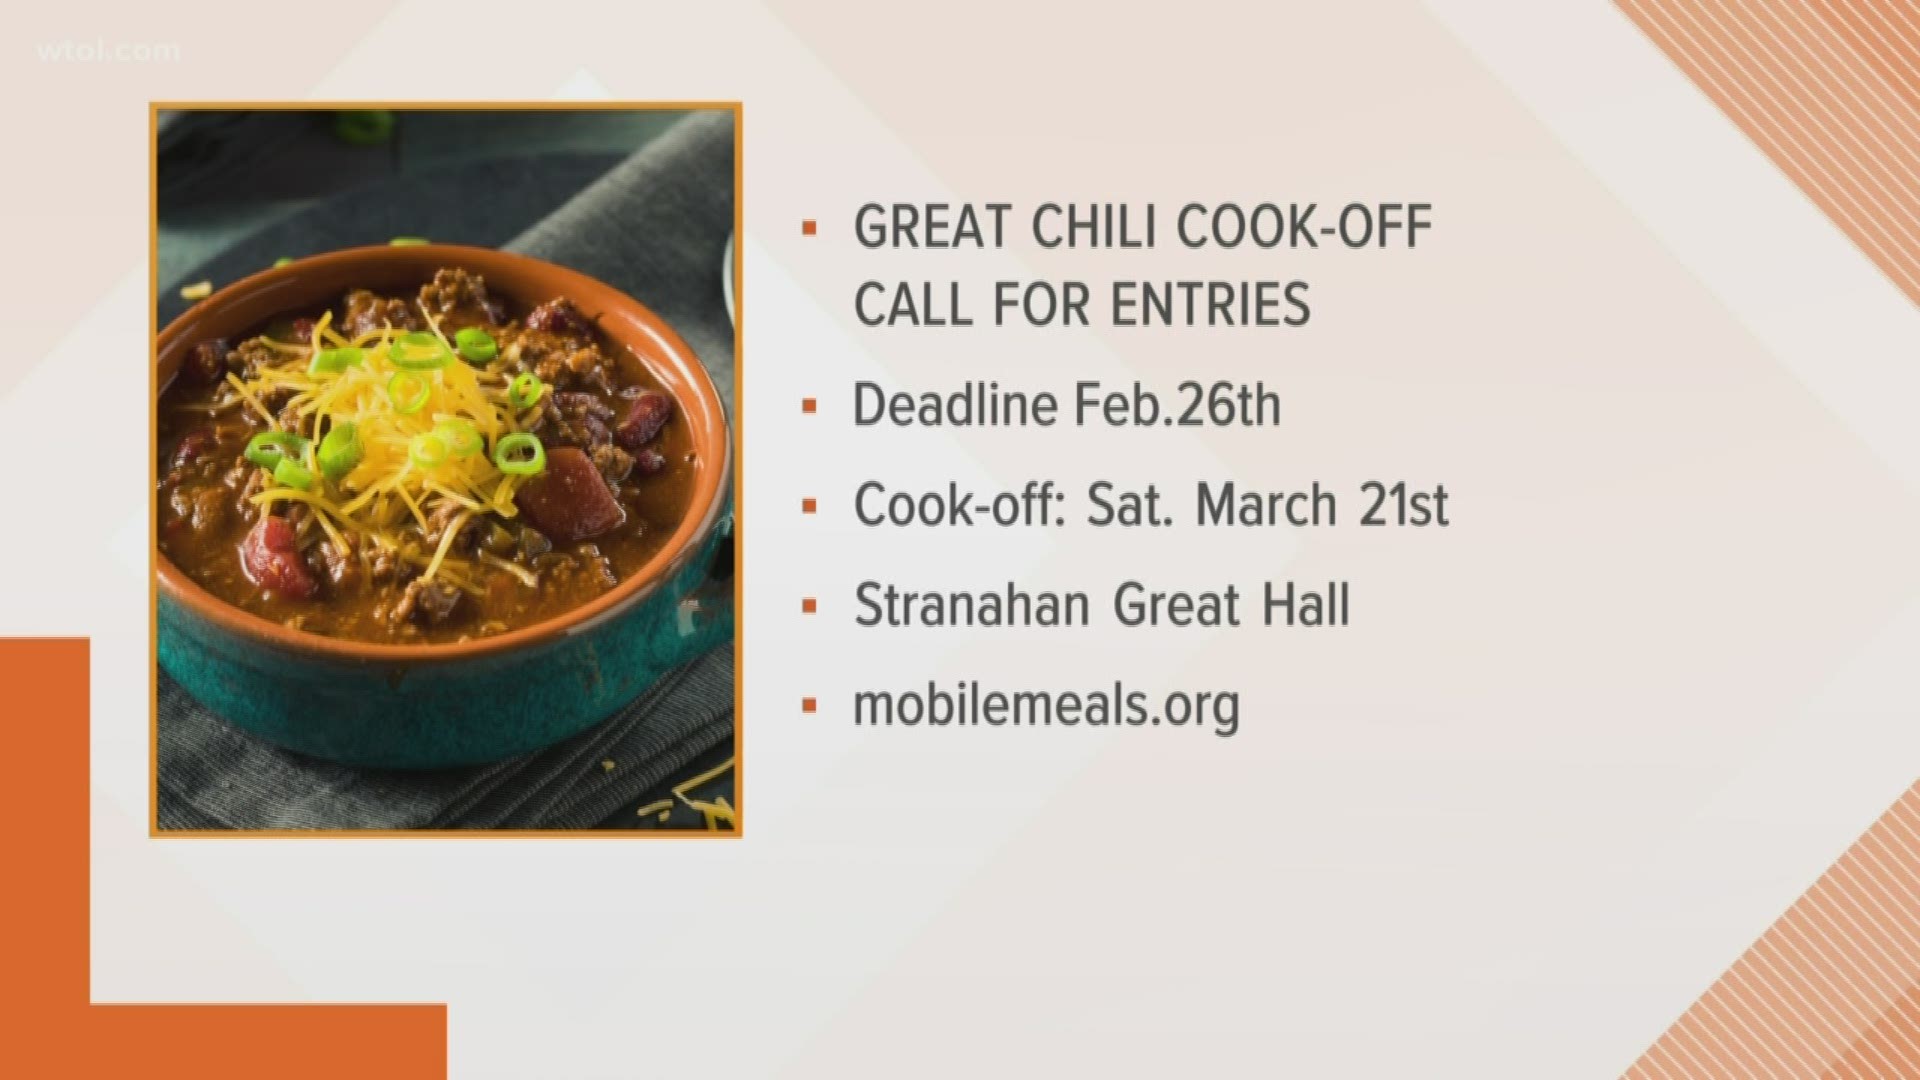 It's almost time for the 28th-annual Great Chili Cook-off to benefit Mobile Meals - have you perfected your chili recipe yet?